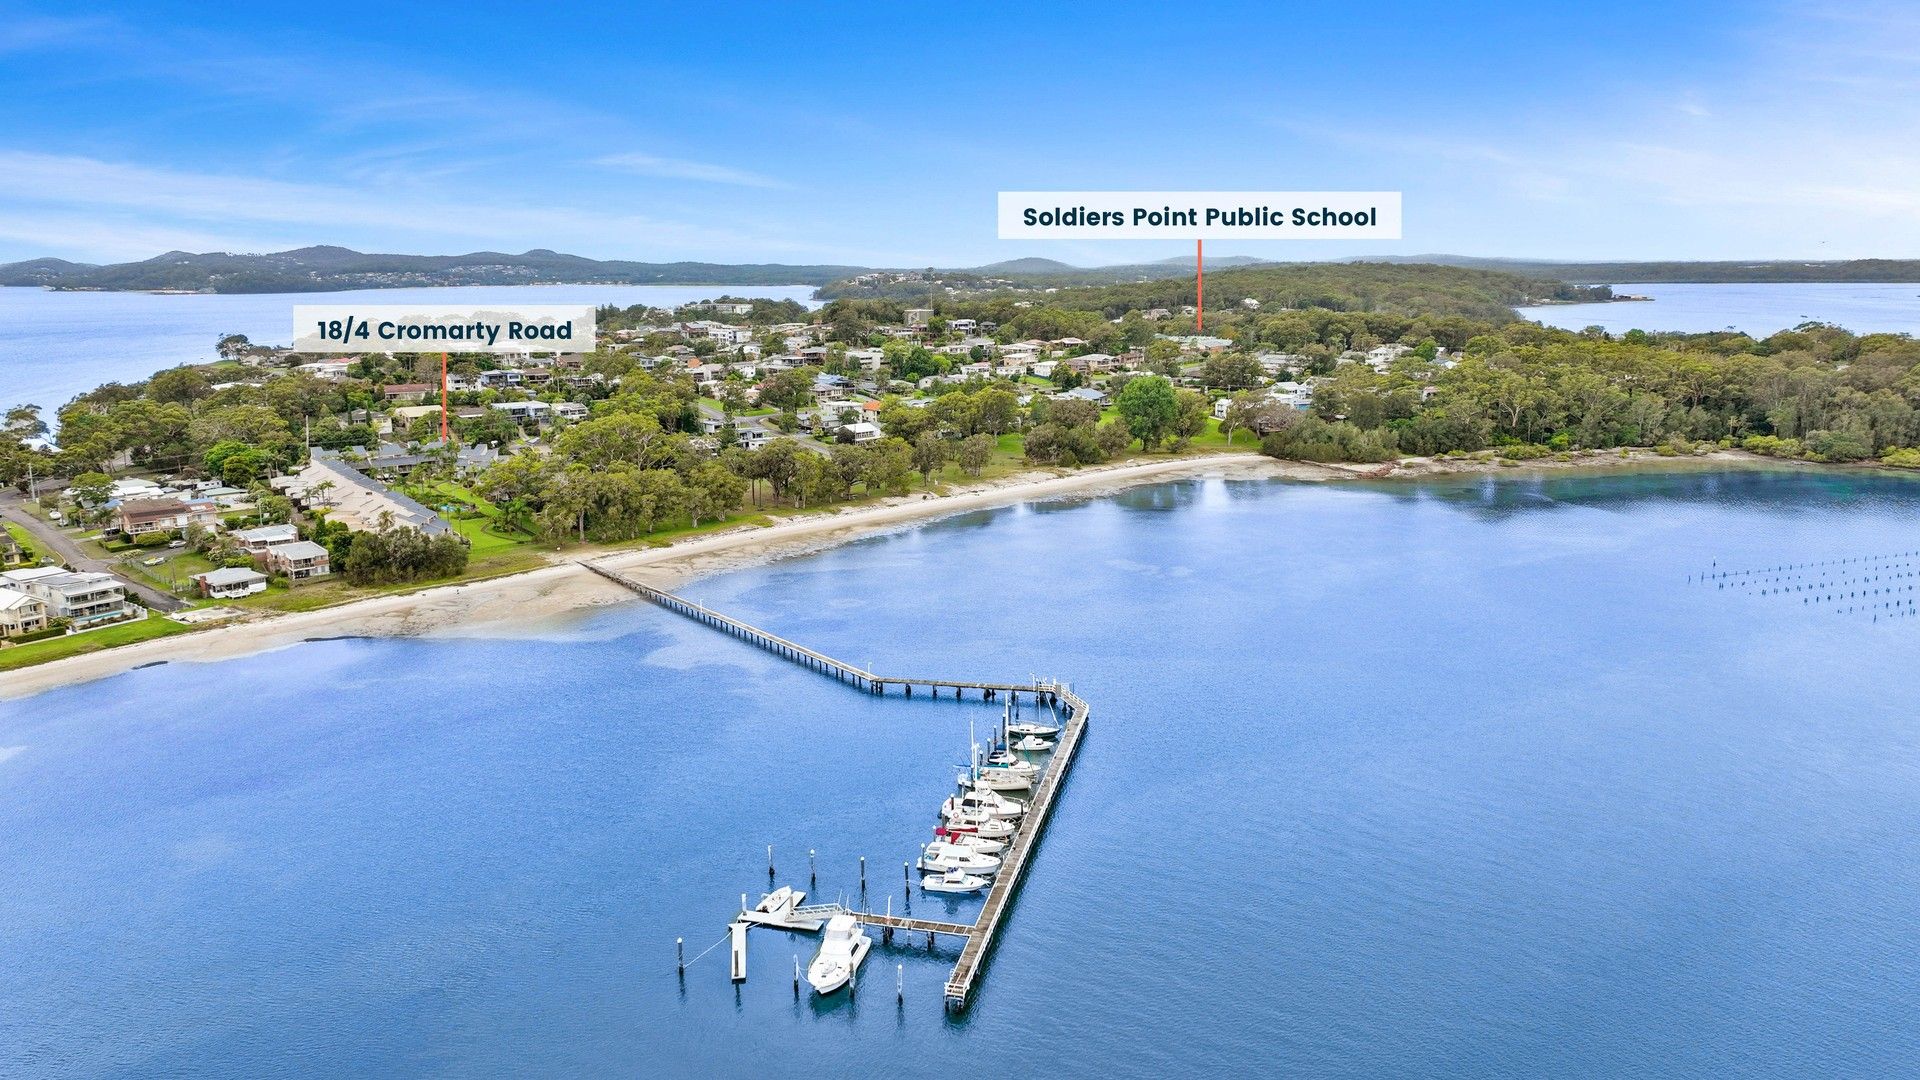 18/4 Cromarty Road, Soldiers Point NSW 2317, Image 0